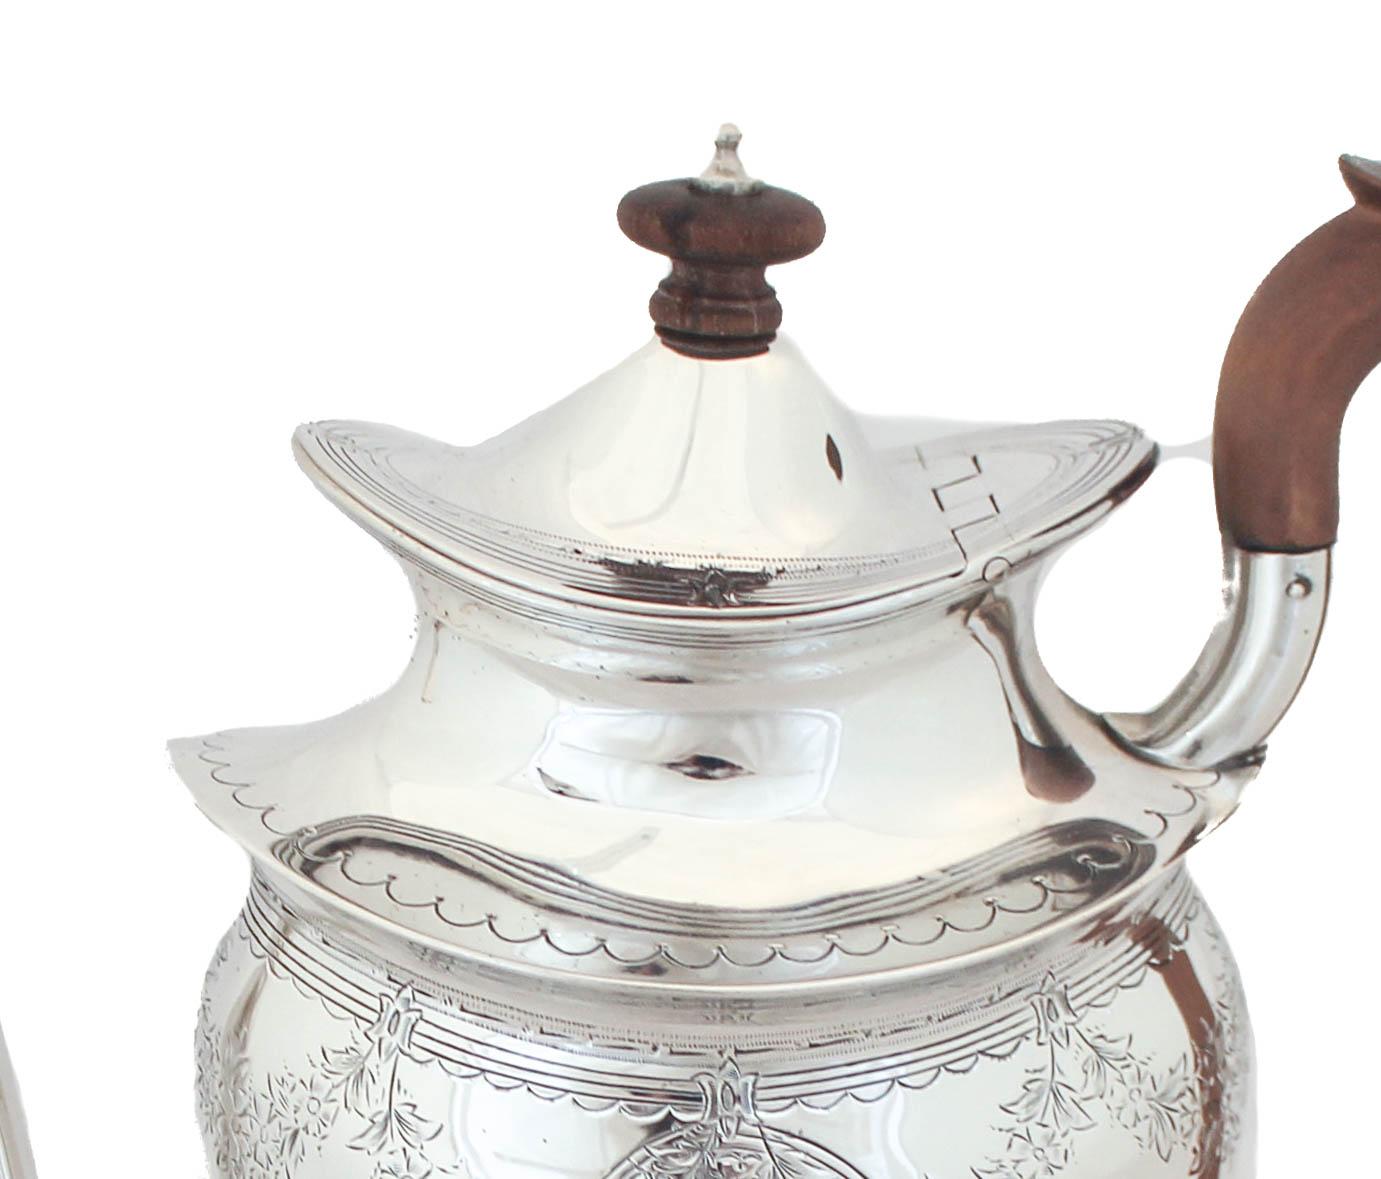 We are happy to offer you this sterling silver chocolate pot. It has a French look to it but is in fact American, early 20th century. The base is rectangular and frames the pot. Along the top etched garlands and leaves drape the cartouche. In the